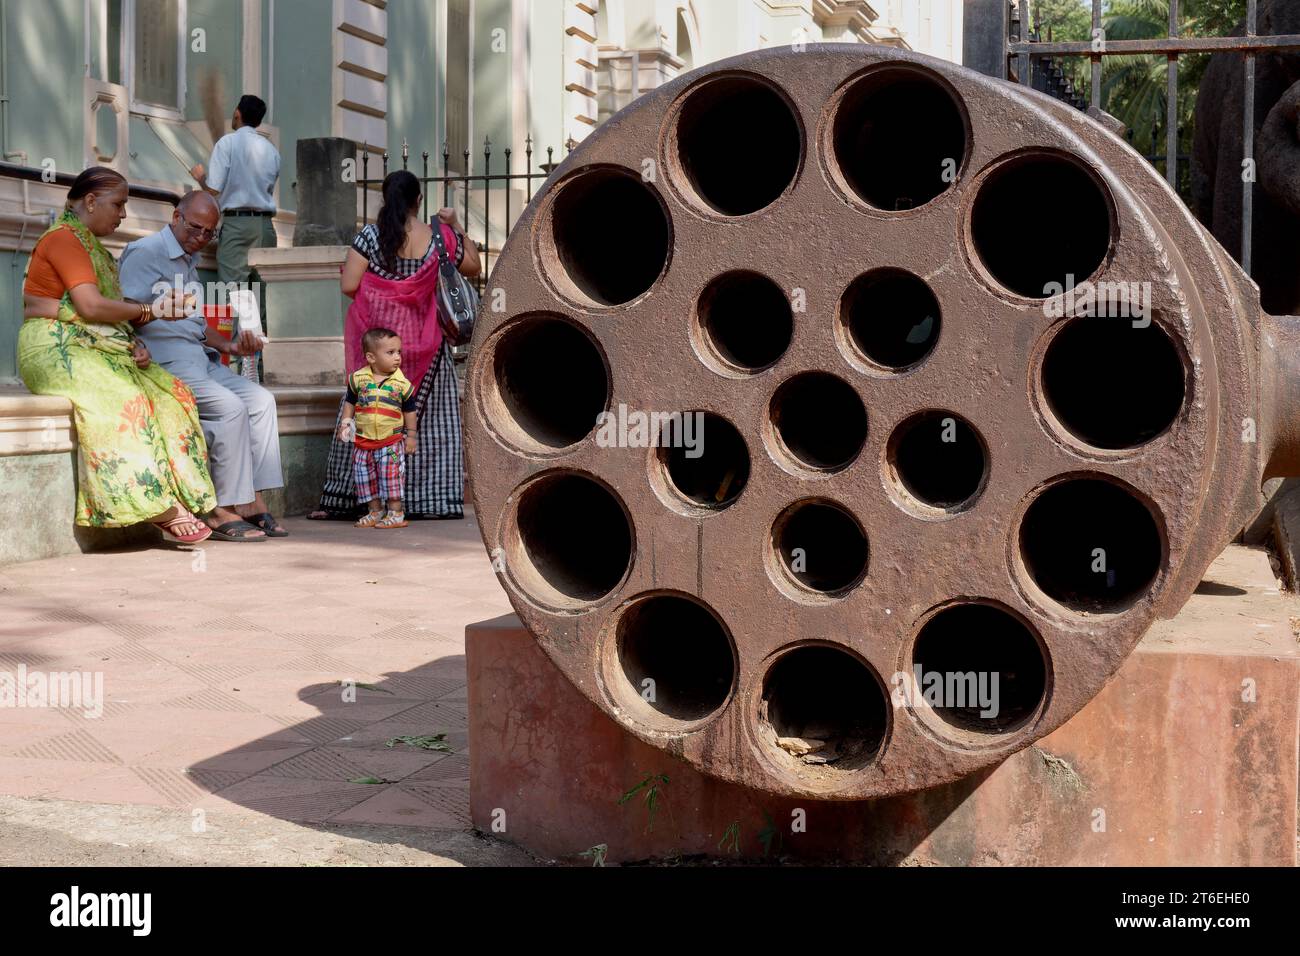 Visitors to Dr. Bhau Daji Lad Museum in Byculla, Mumbai, India, next to a large multi-barrel cannon from the Mughal era placed outside of the museum Stock Photo